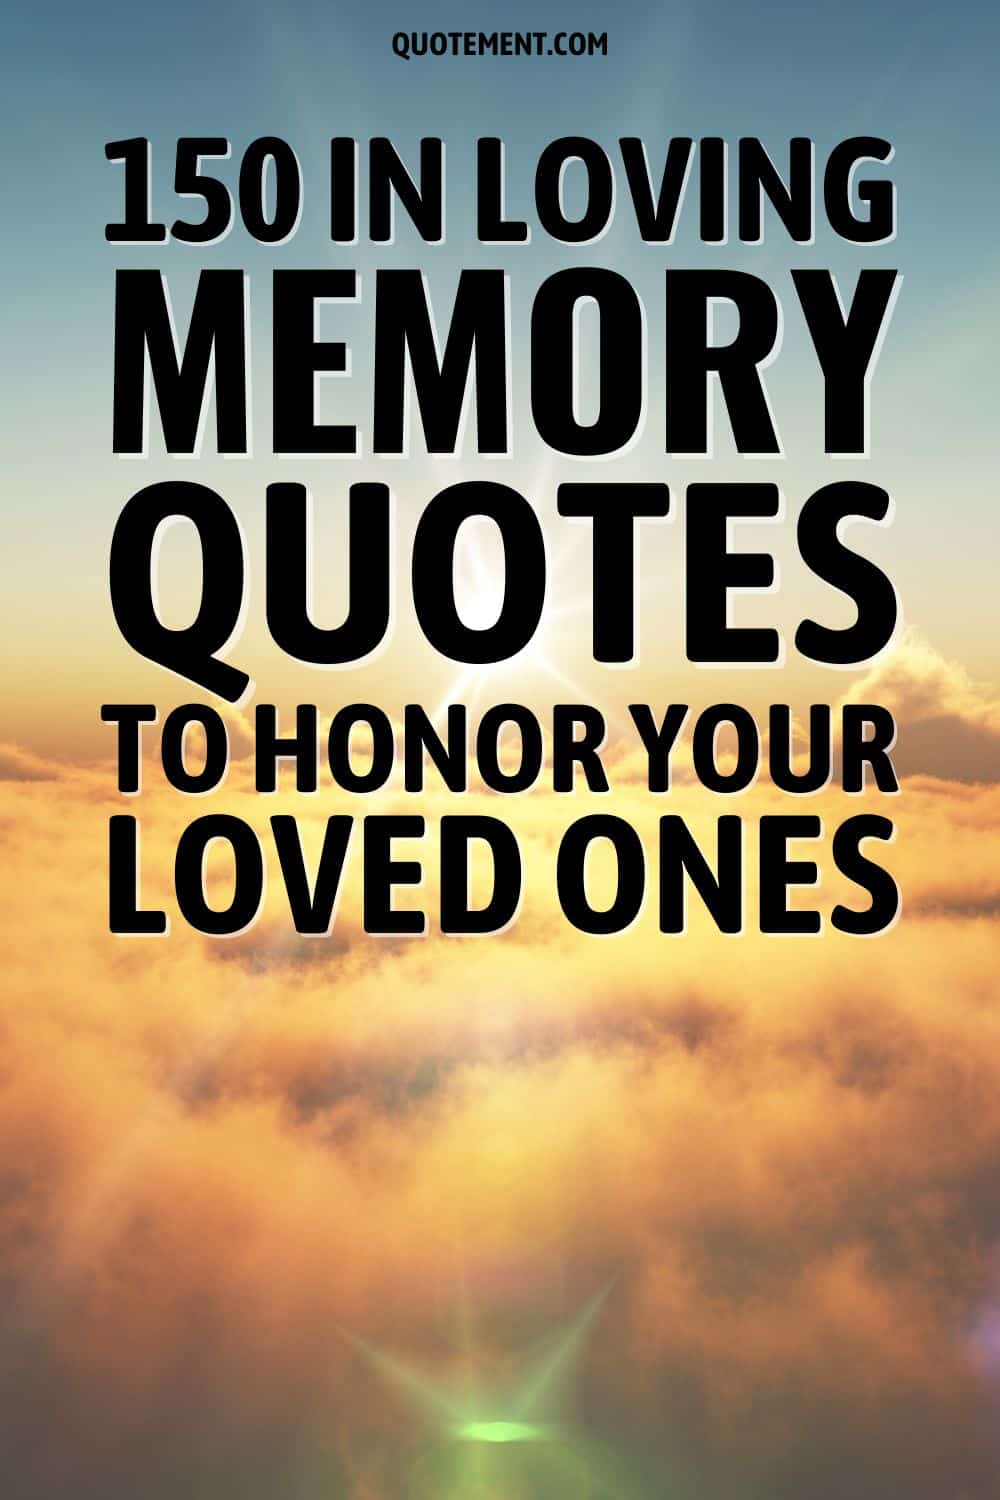 150 In Loving Memory Quotes To Honor Your Loved Ones